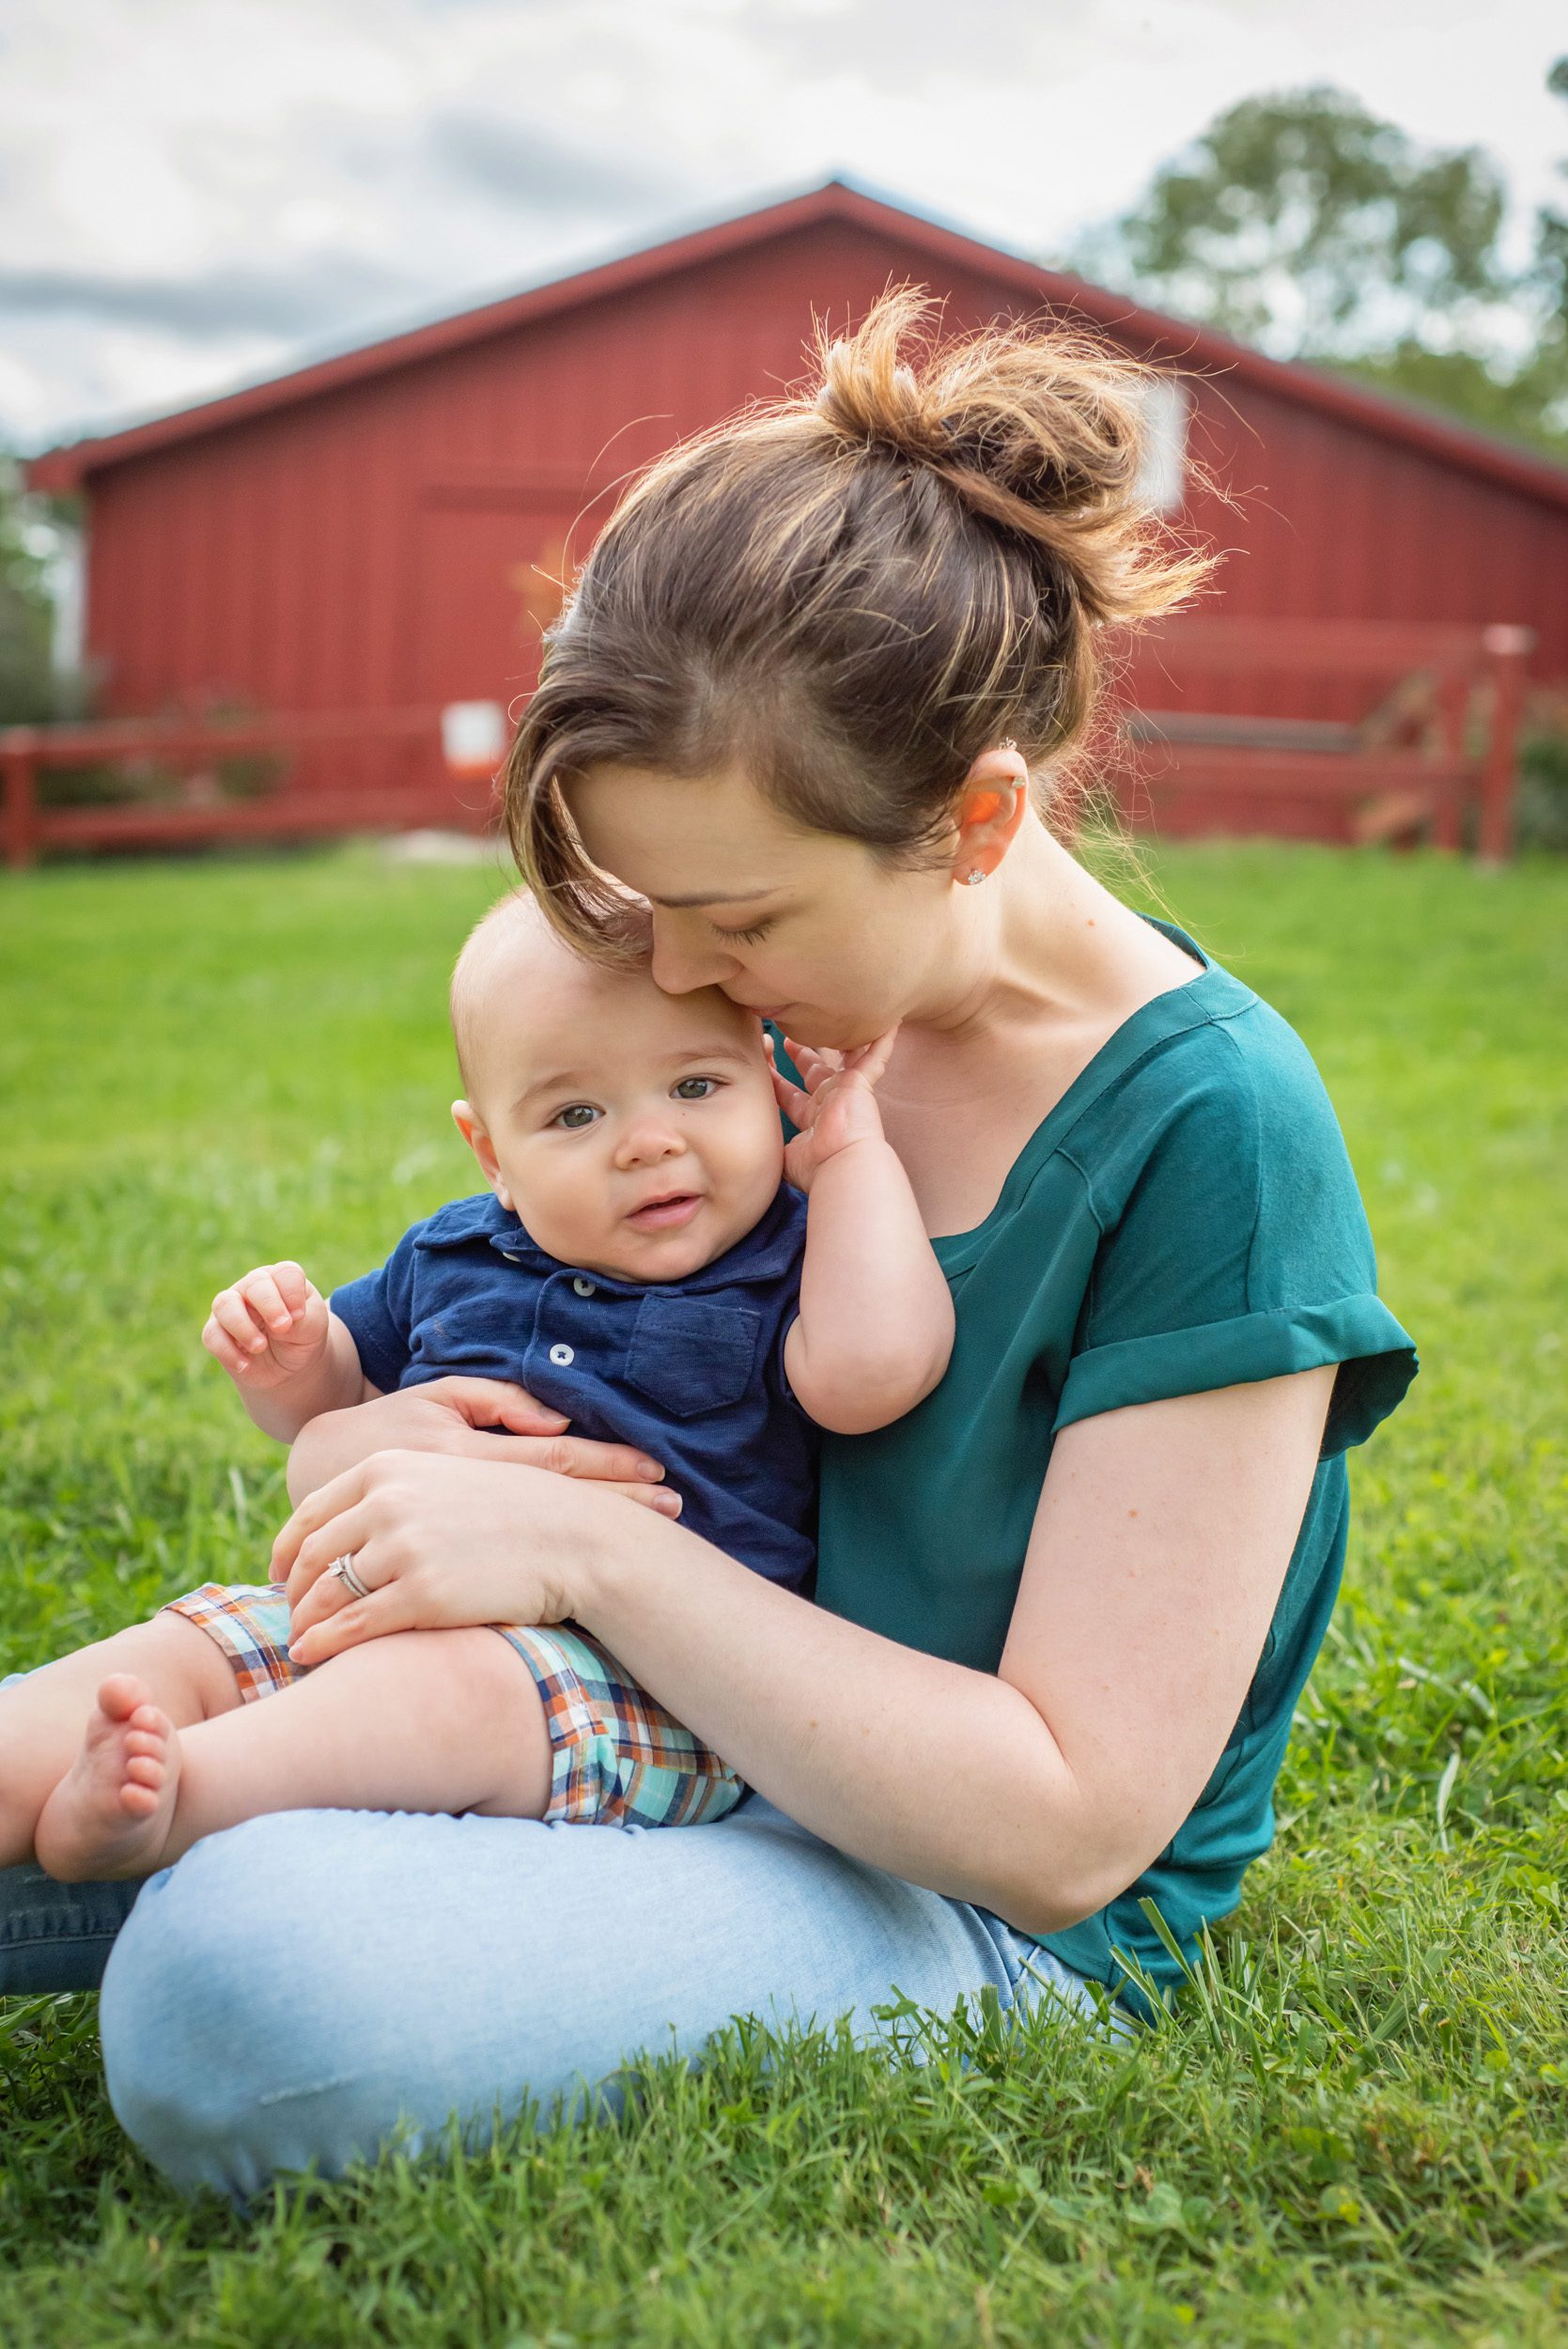 a mom hugging her young son in the grass in front of a red barn during a family photoshoot